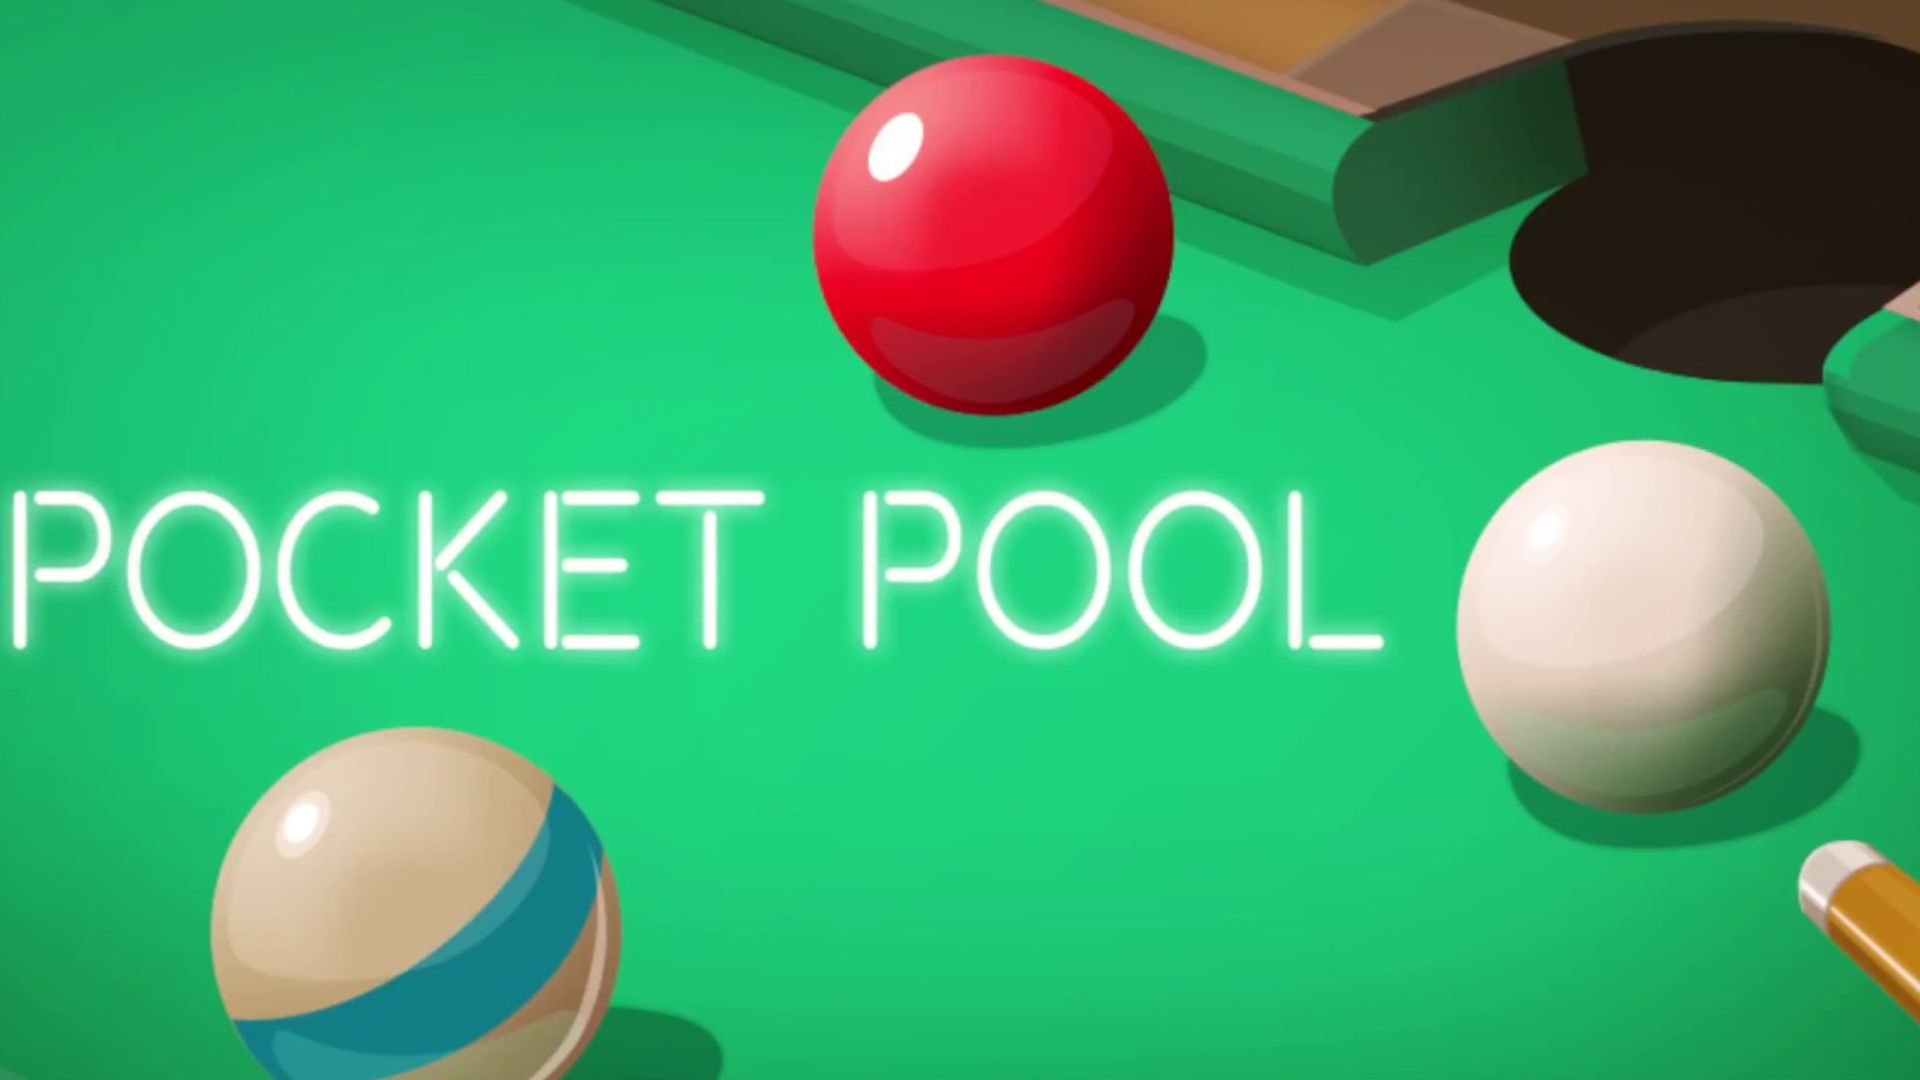 Key art for Pocket Pool, a puzzle pool game